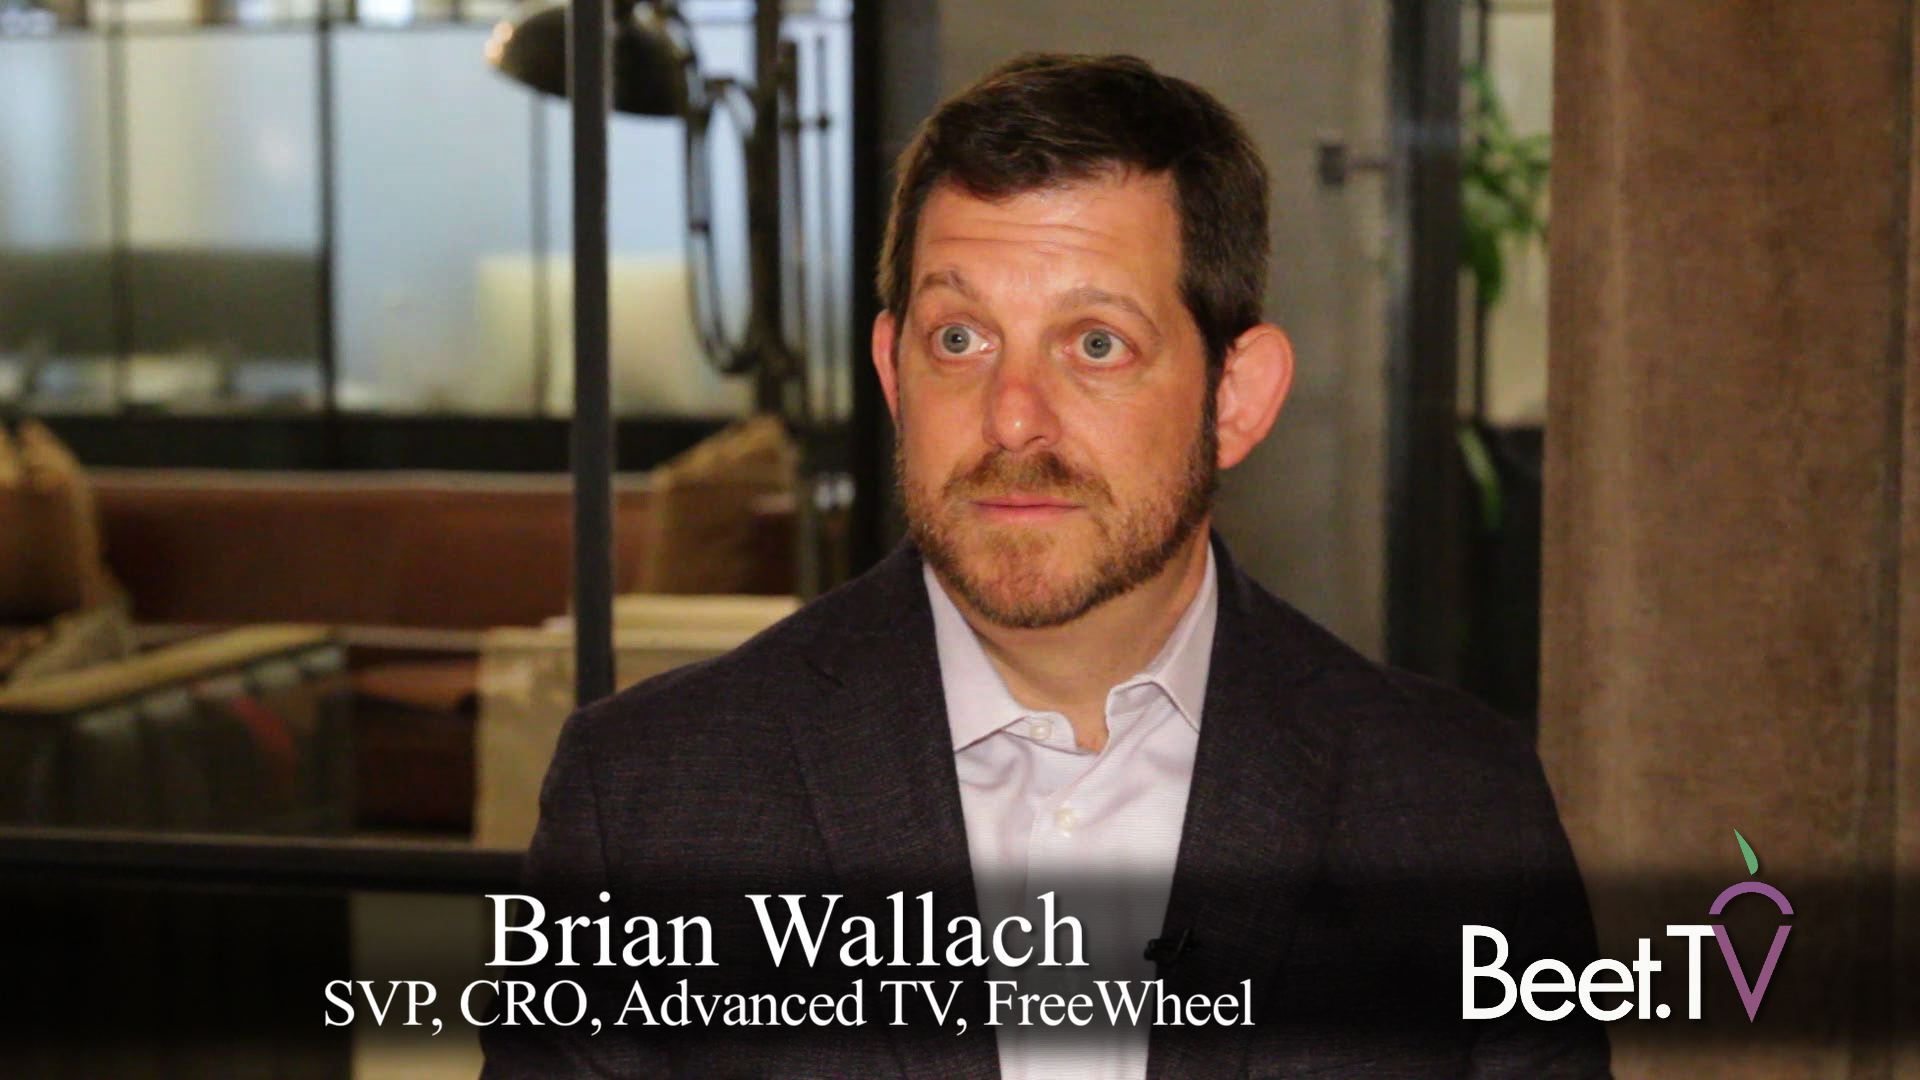 Tracking Incremental Reach Expands With ACR Data: FreeWheel’s Wallach